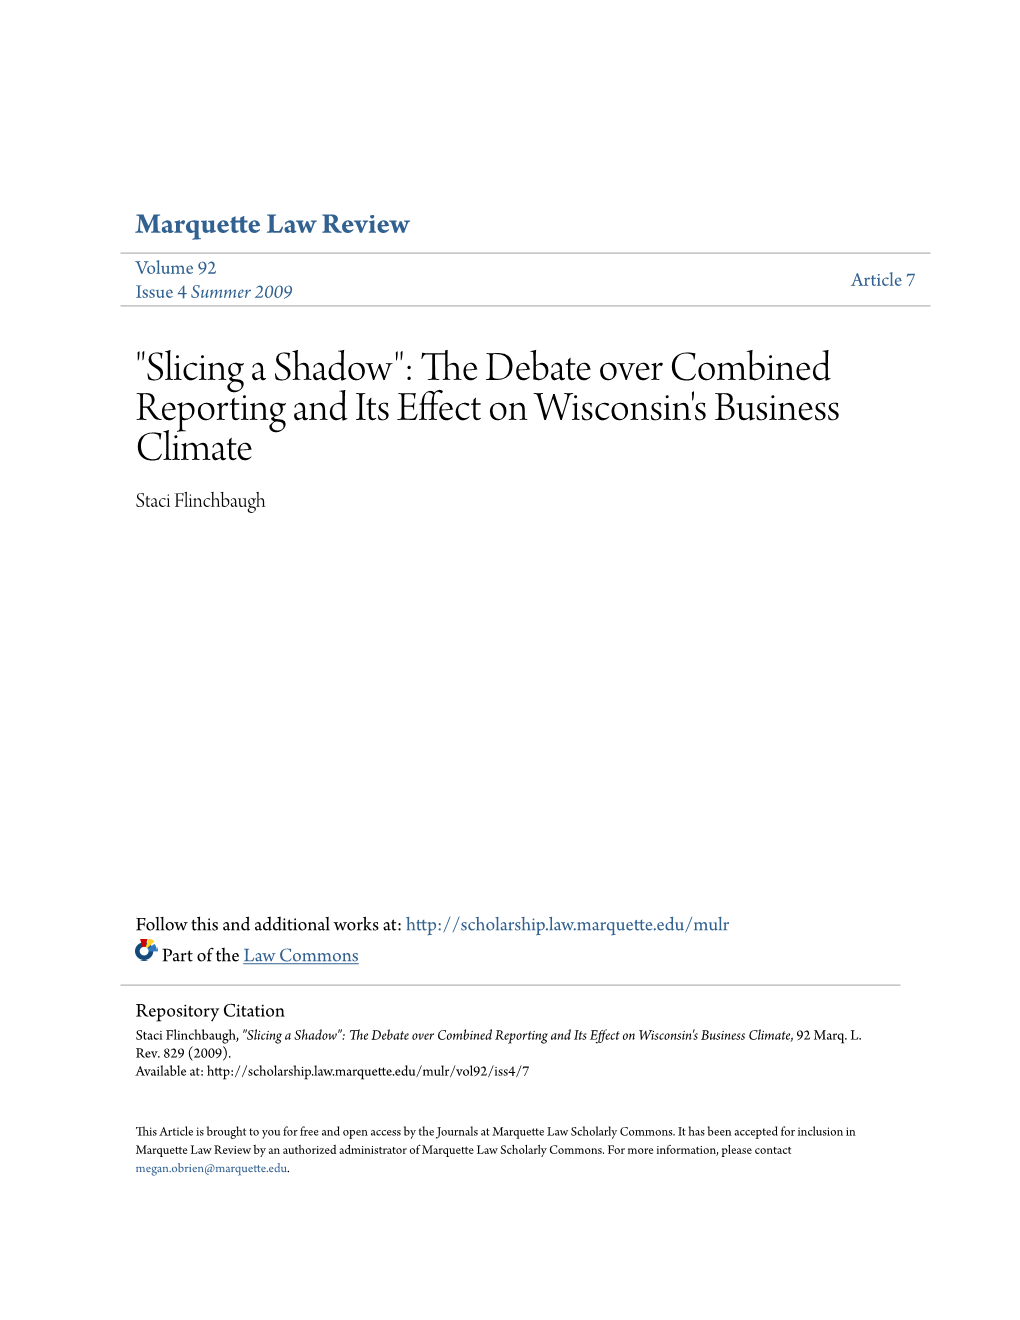 Slicing a Shadow": the Ed Bate Over Combined Reporting and Its Effect on Wisconsin's Business Climate Staci Flinchbaugh